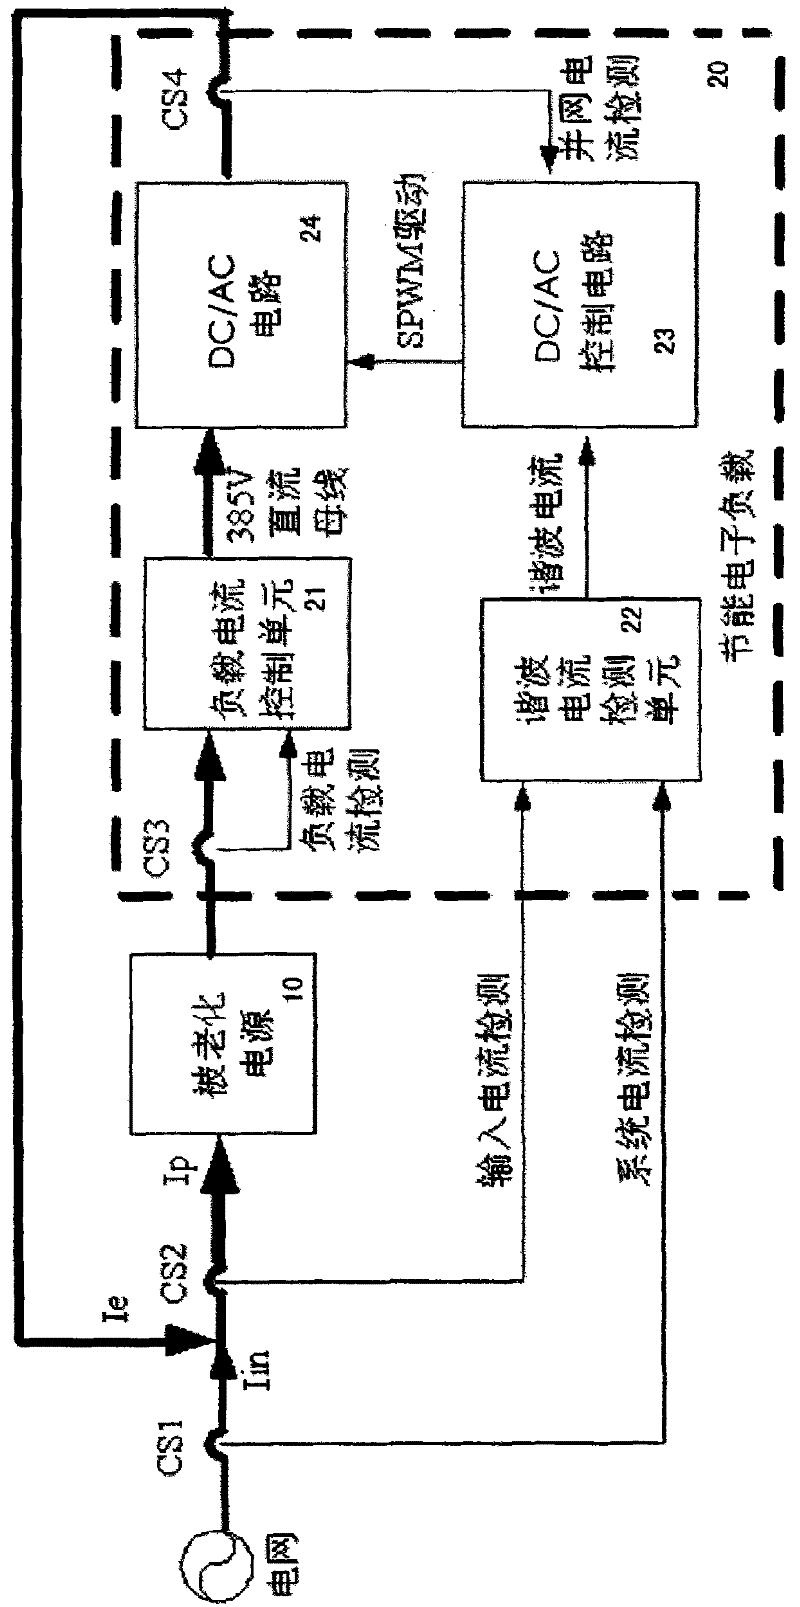 Method and system for power supply aging